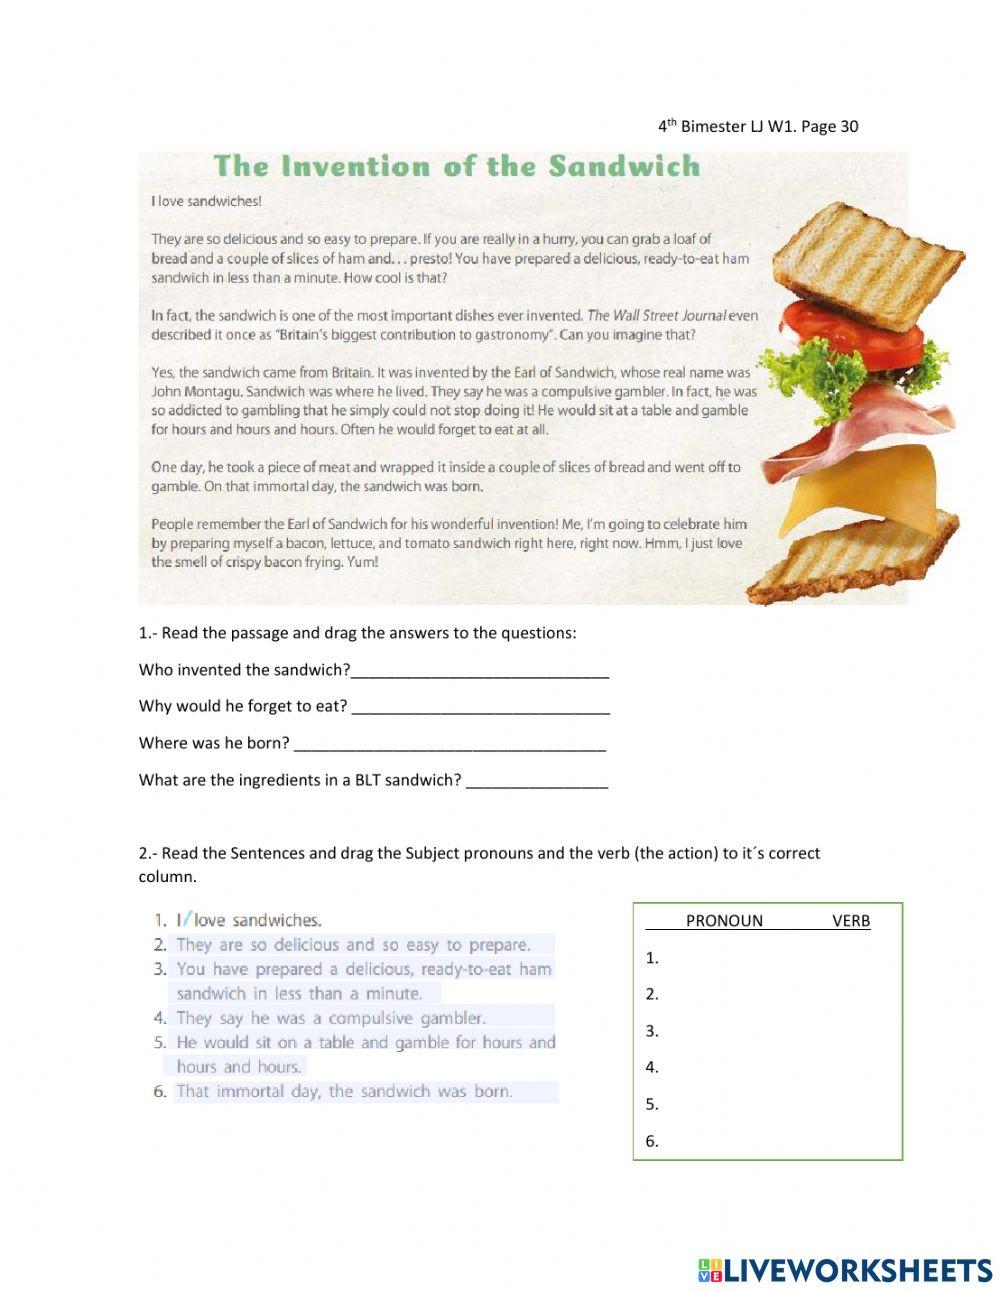 The invention of the sandwich